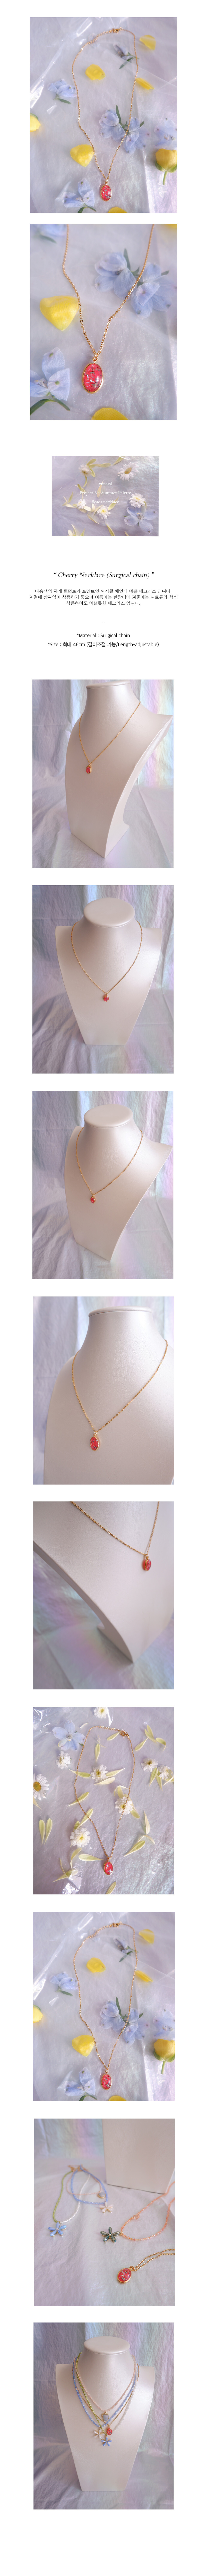 Cherry necklace (Surgical chain)